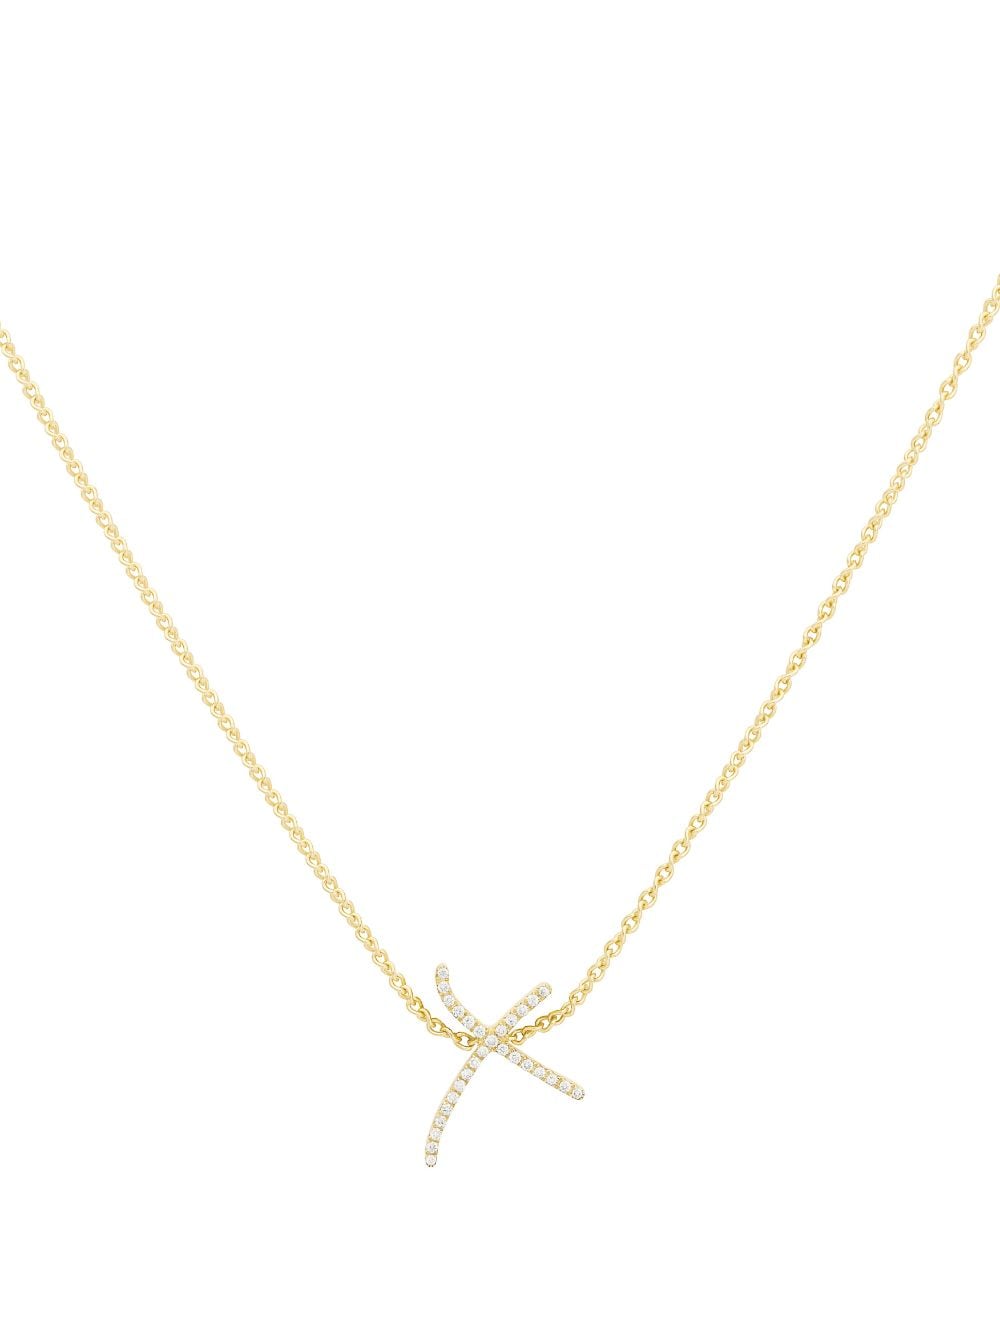 Stephen Webster I Promise To Love You Neon Kiss Pendant Necklace In Gold